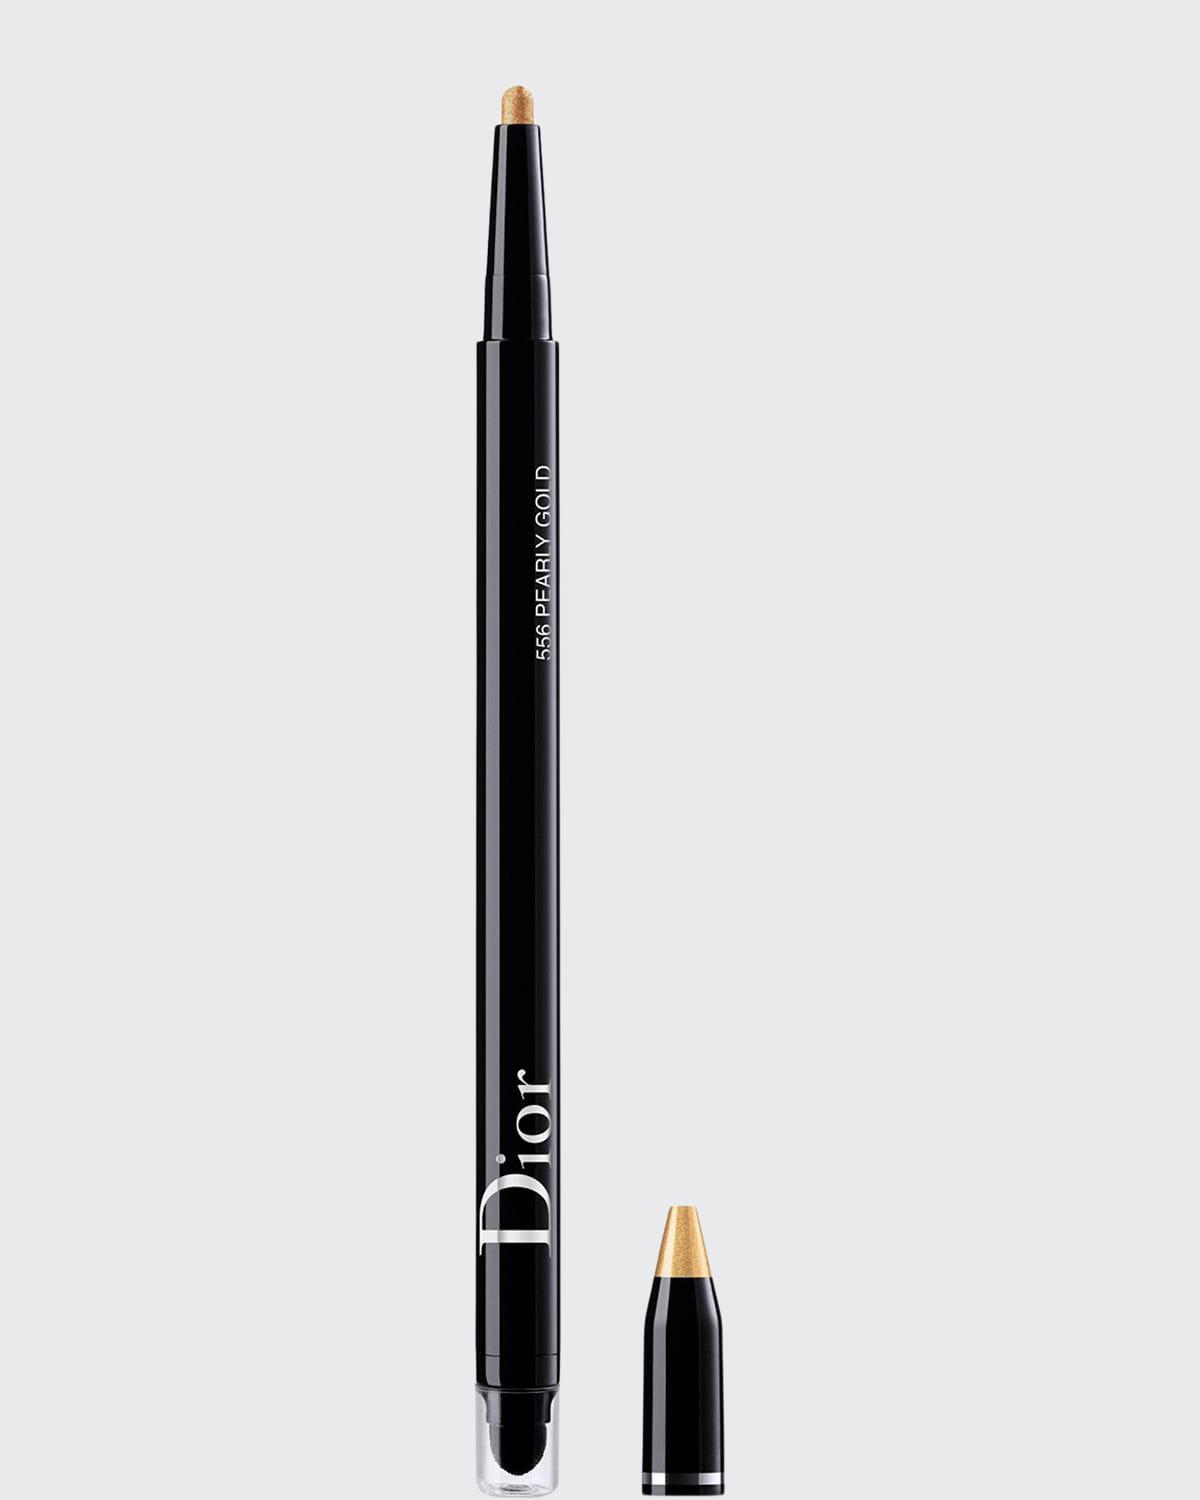 Dior Show 24h Stylo - Waterproof Eyeliner In 556 Pearly Gold